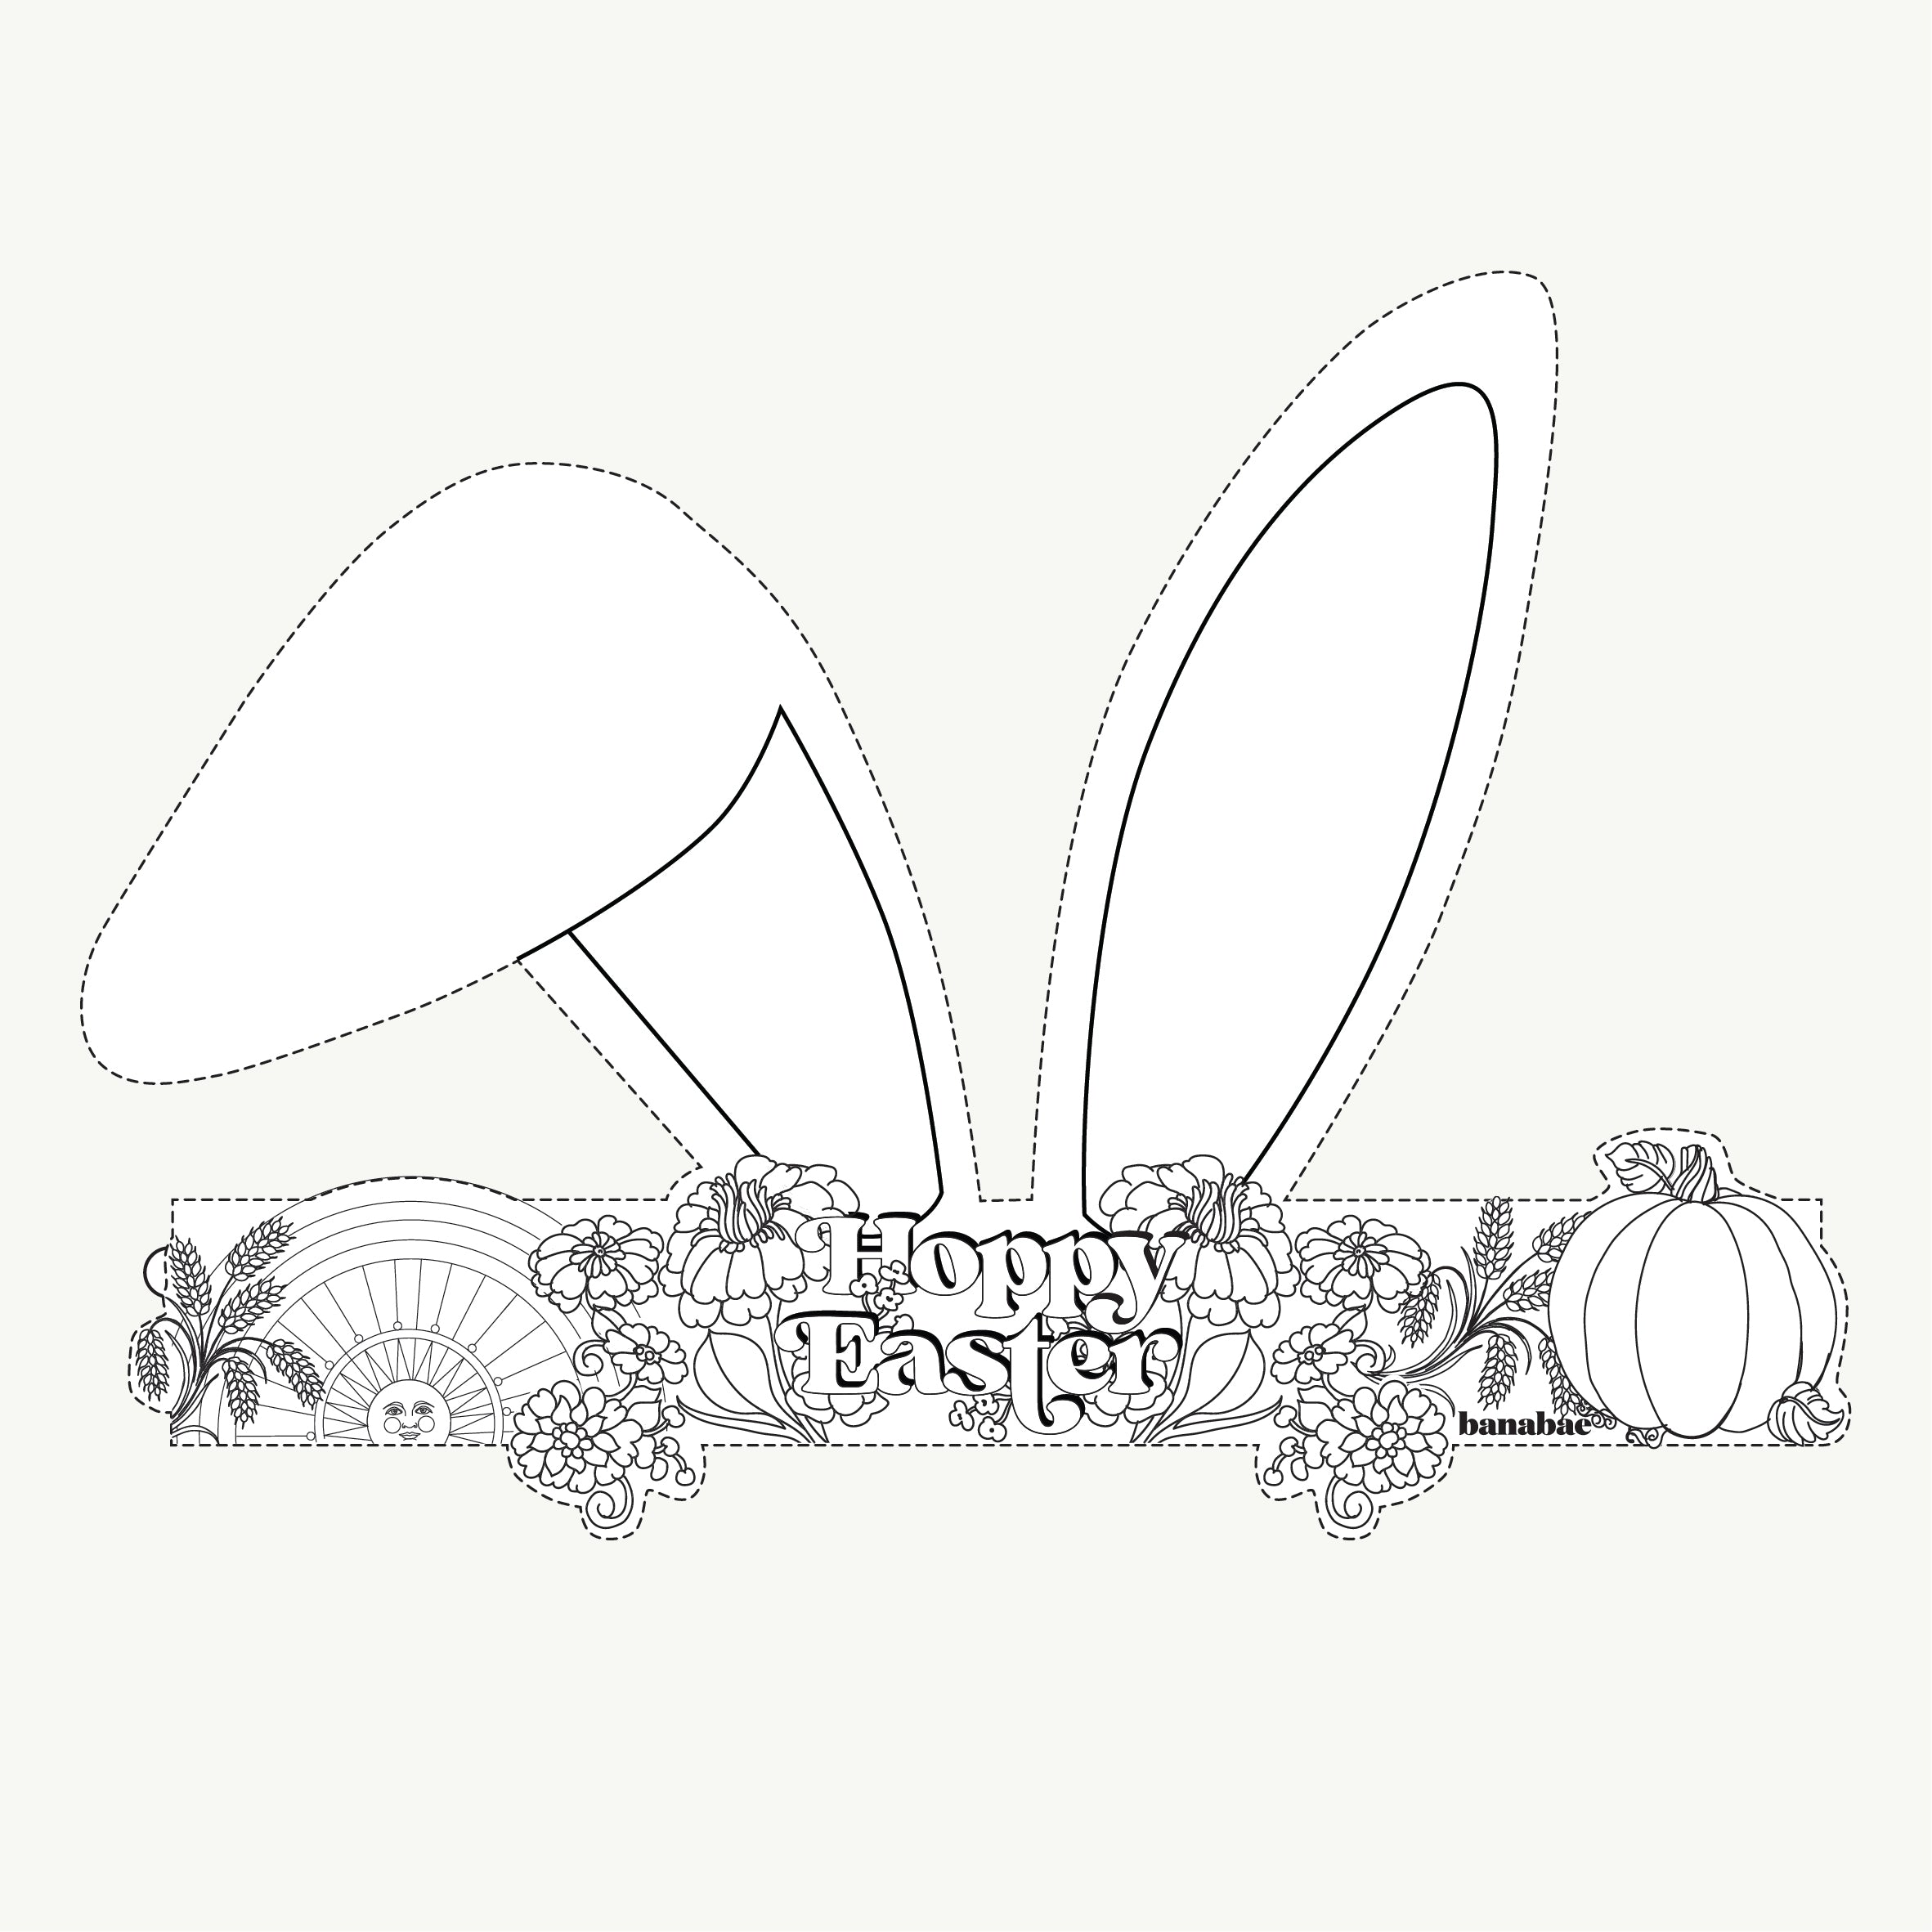 FREE Bunny Ears Colouring In Download